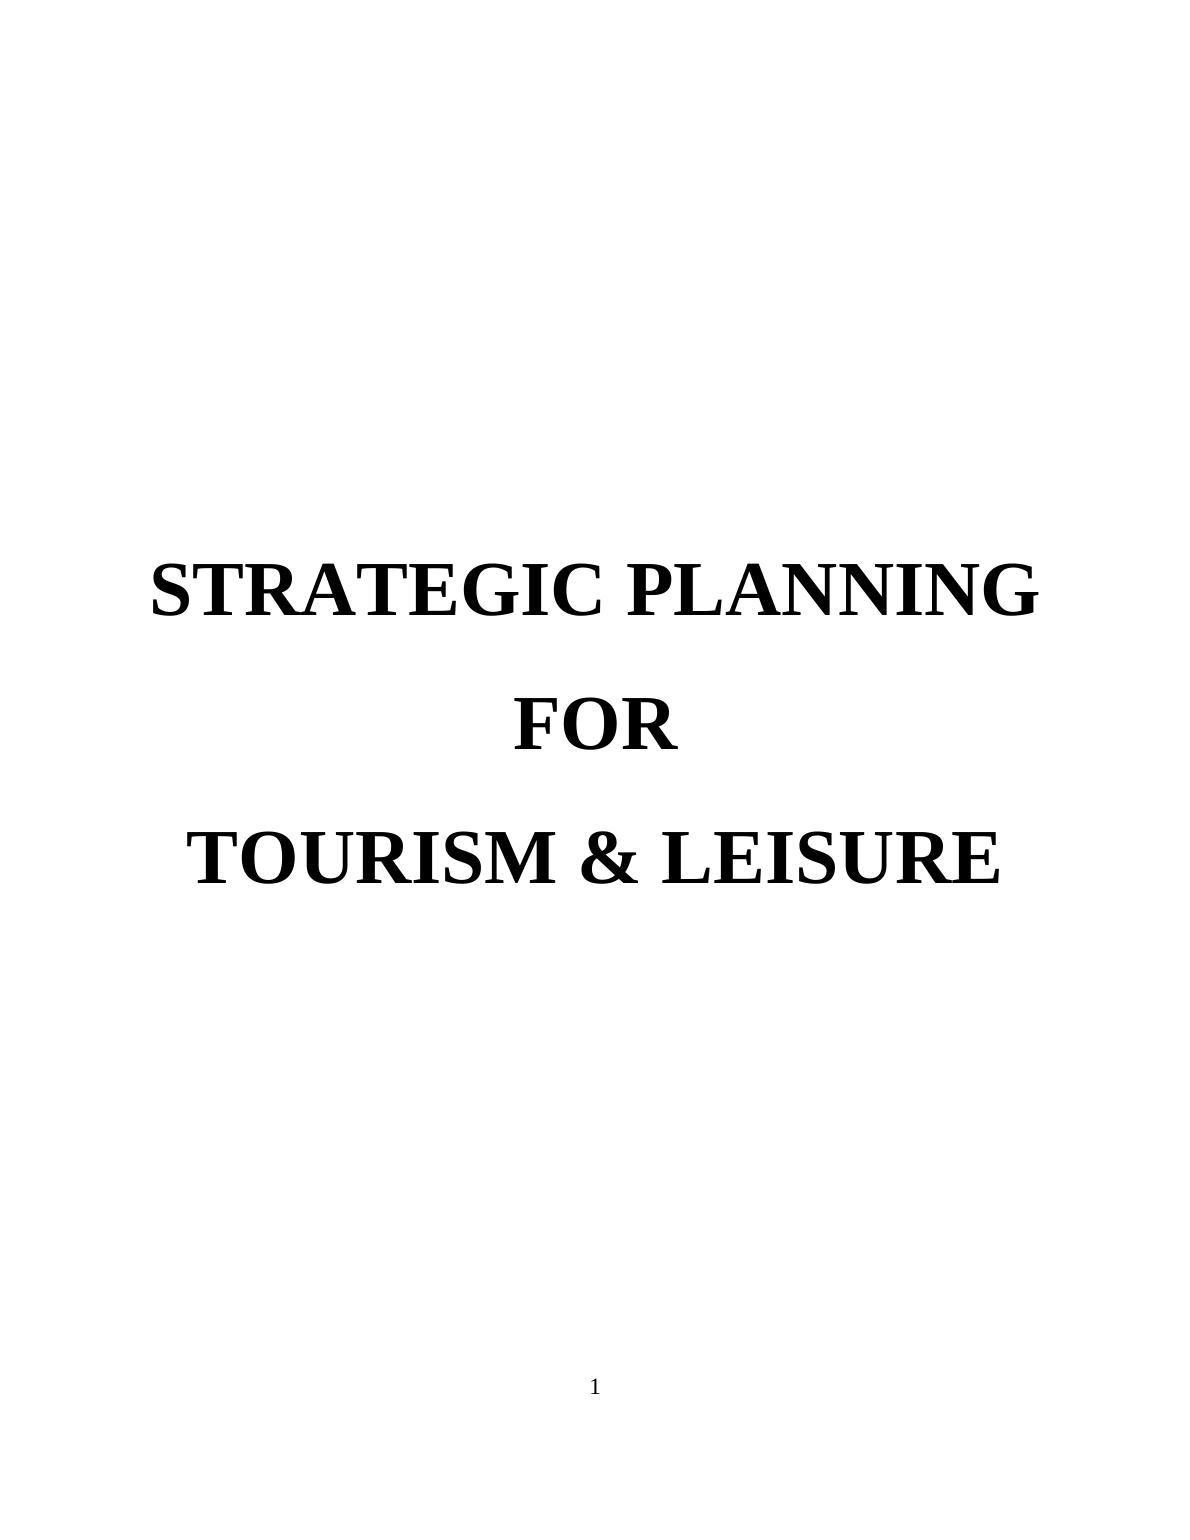 strategic planning for tourism and leisure-2_1